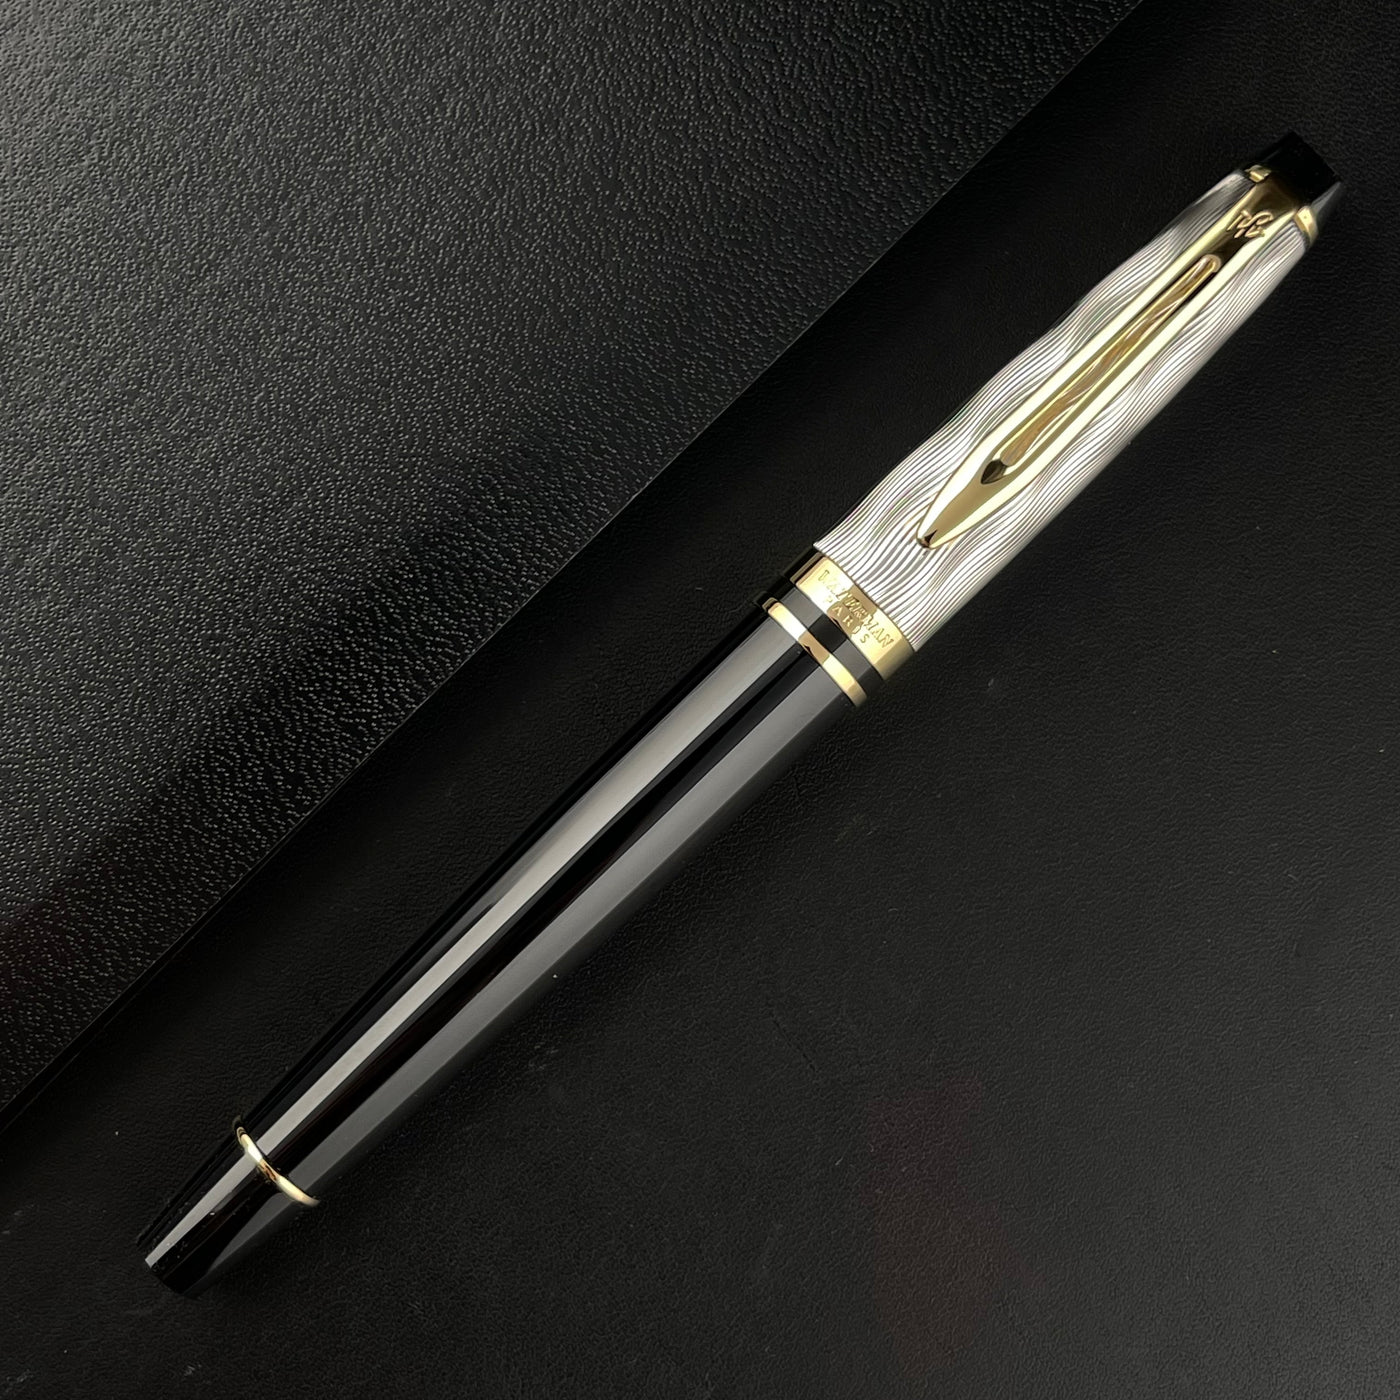 Waterman Expert Rollerball Pen - Reflections of Paris (Special Edition)